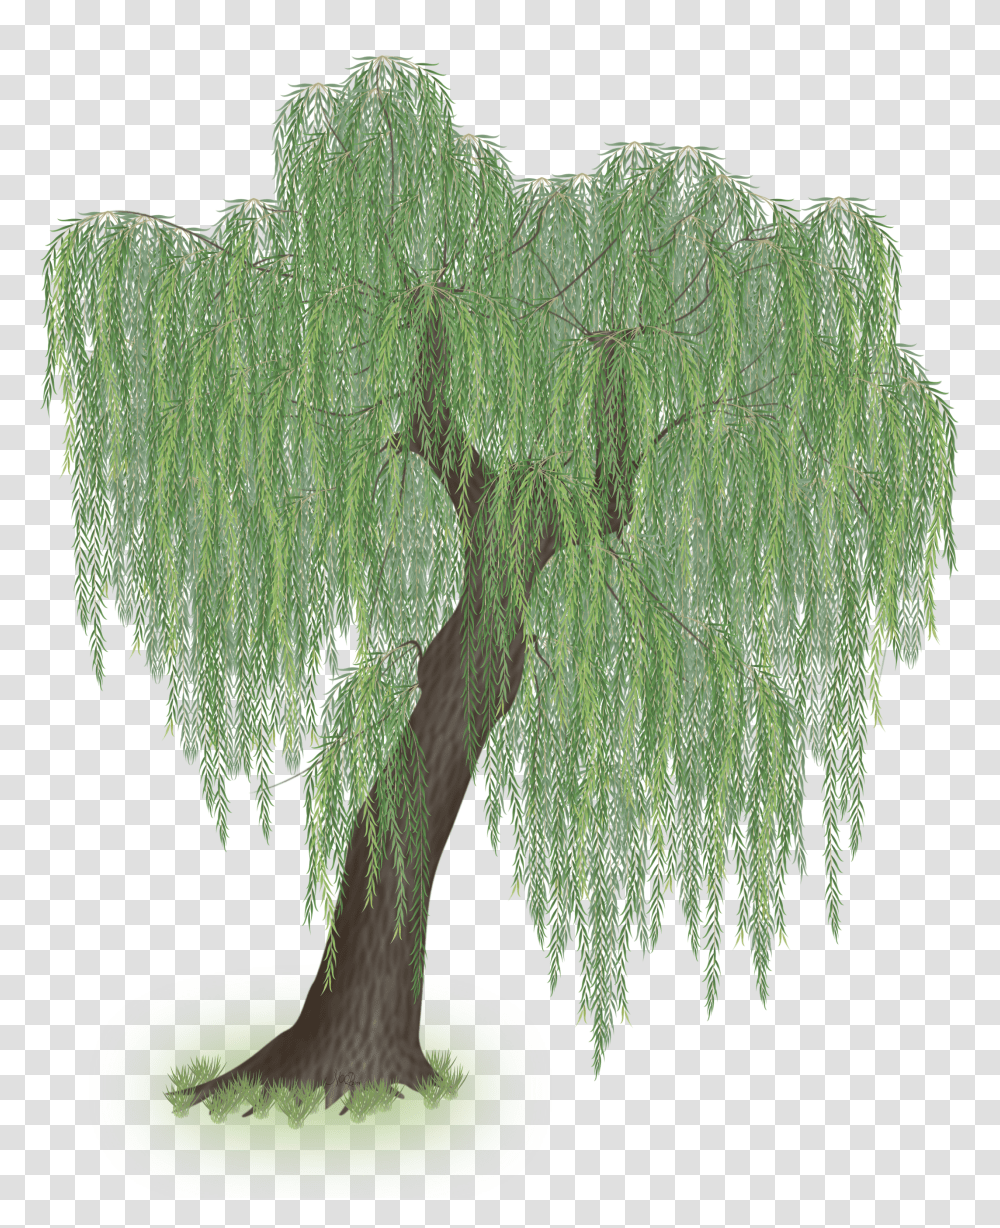 Download Hd Weeping Willow Tree Clipart Willow Tree Background Transparent Png